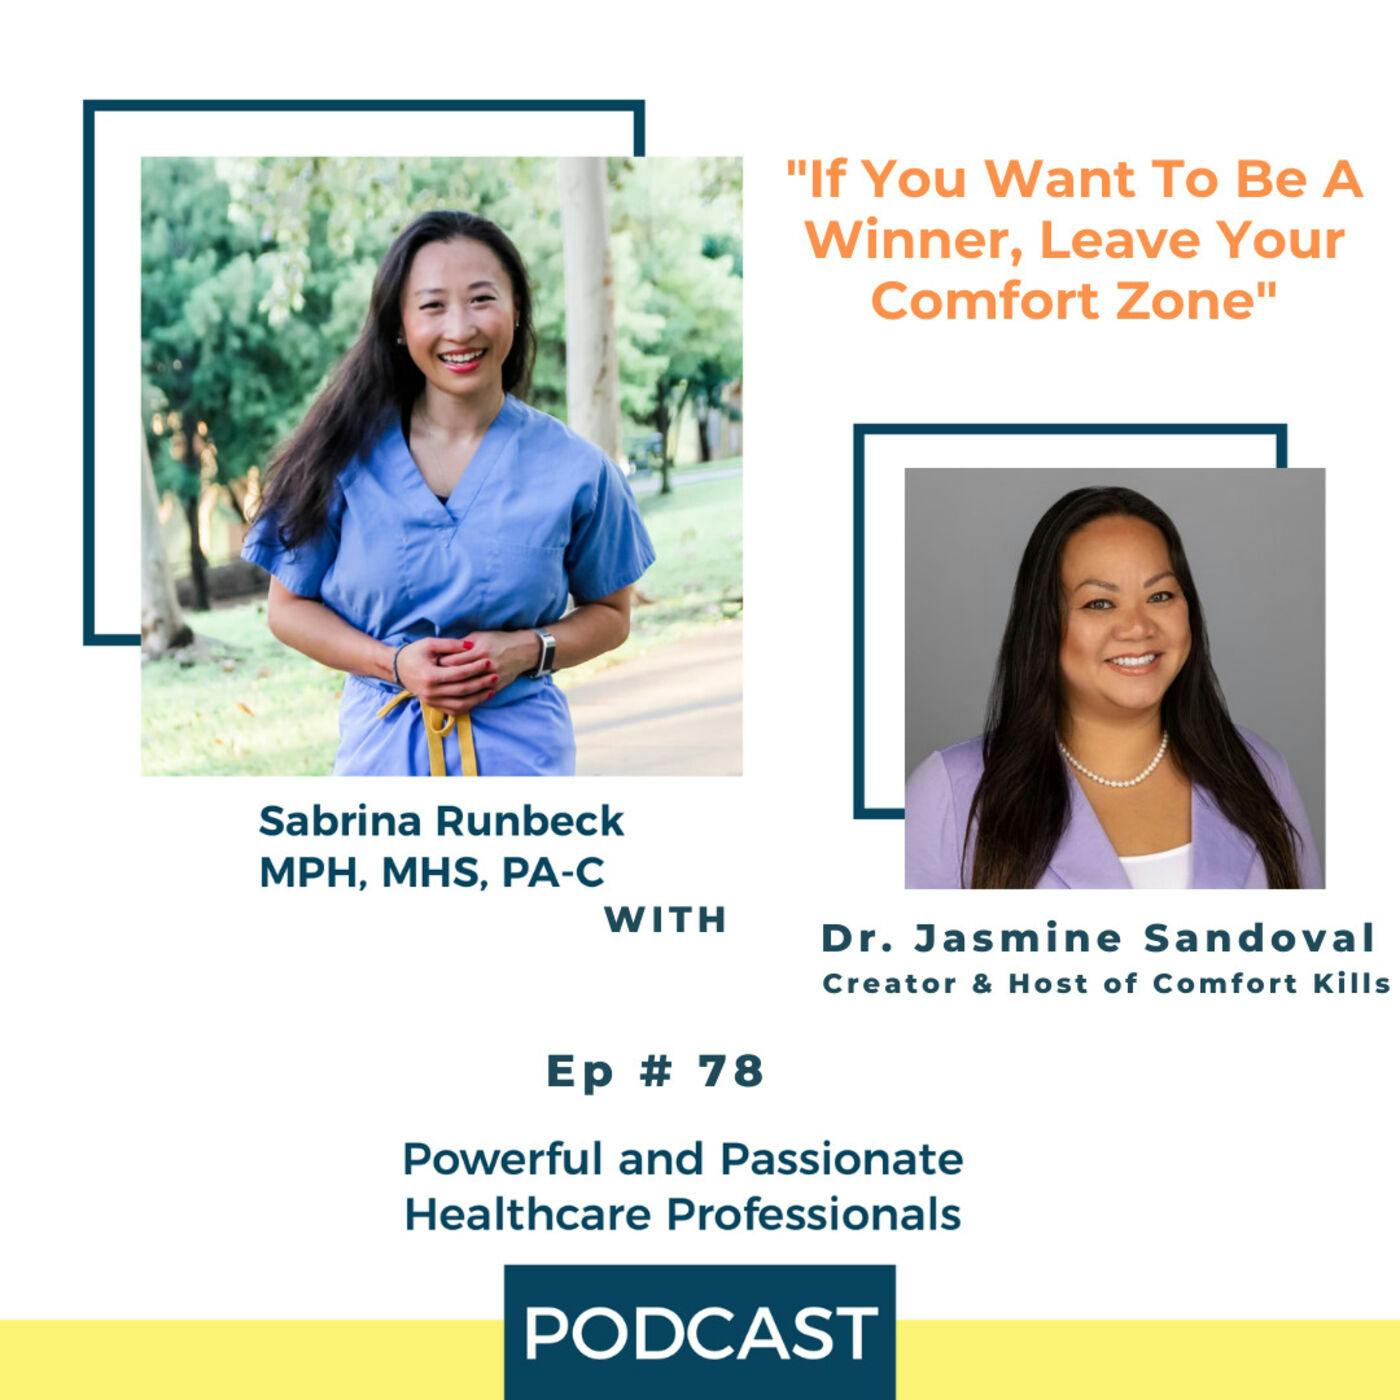 Ep 78 – If You Want To Be A Winner, Leave Your Comfort Zone with Dr. Jasmine Sandoval